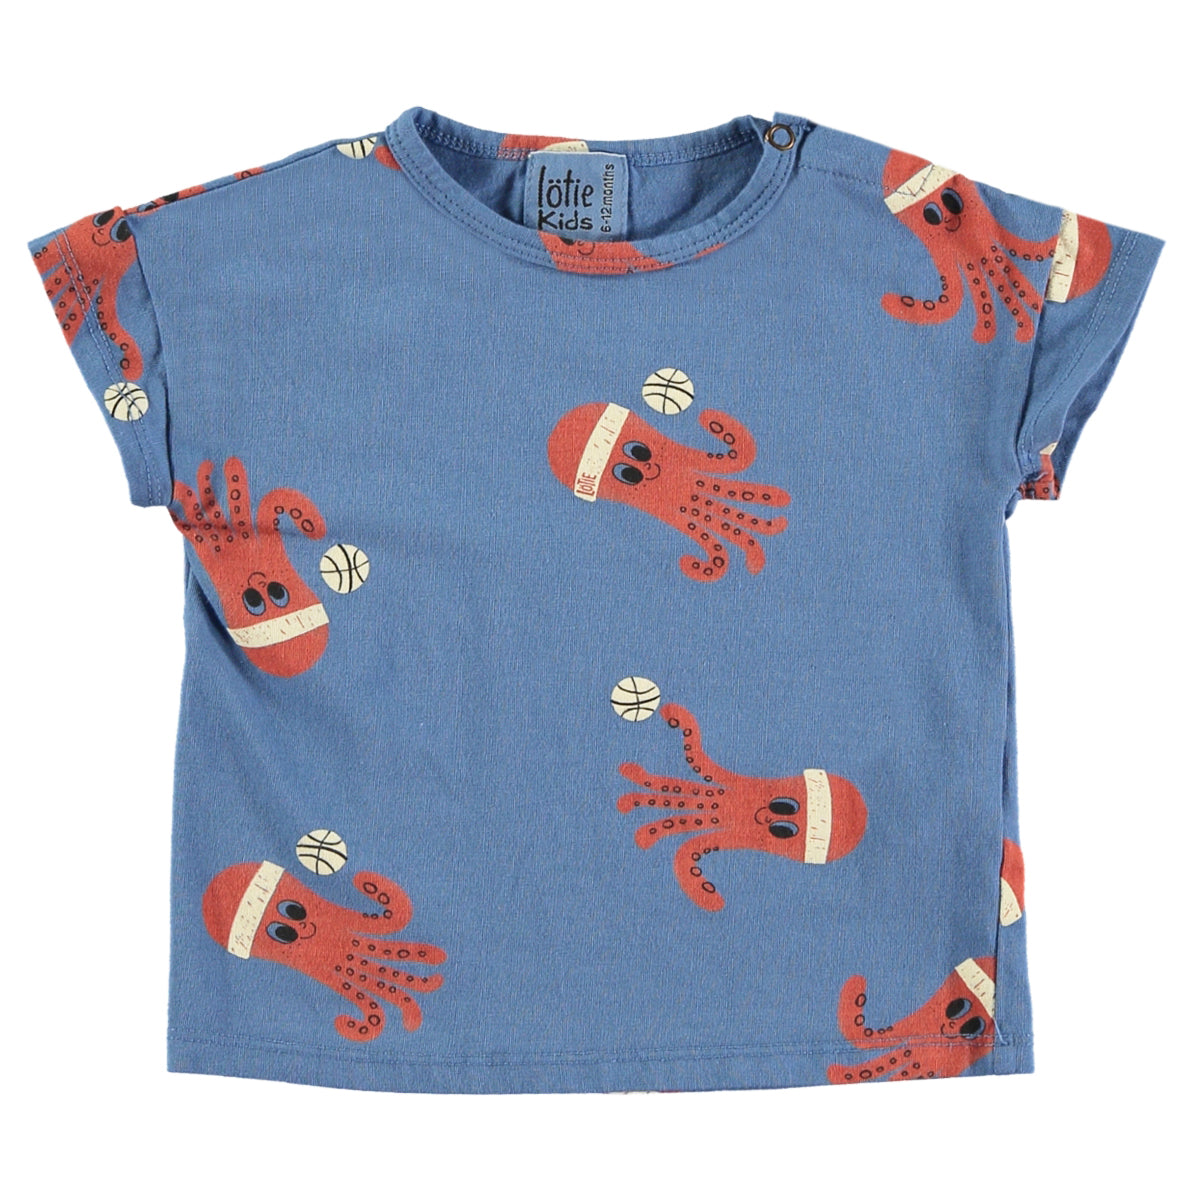 Lotie Kids - baby t-shirt - octopuses - blue